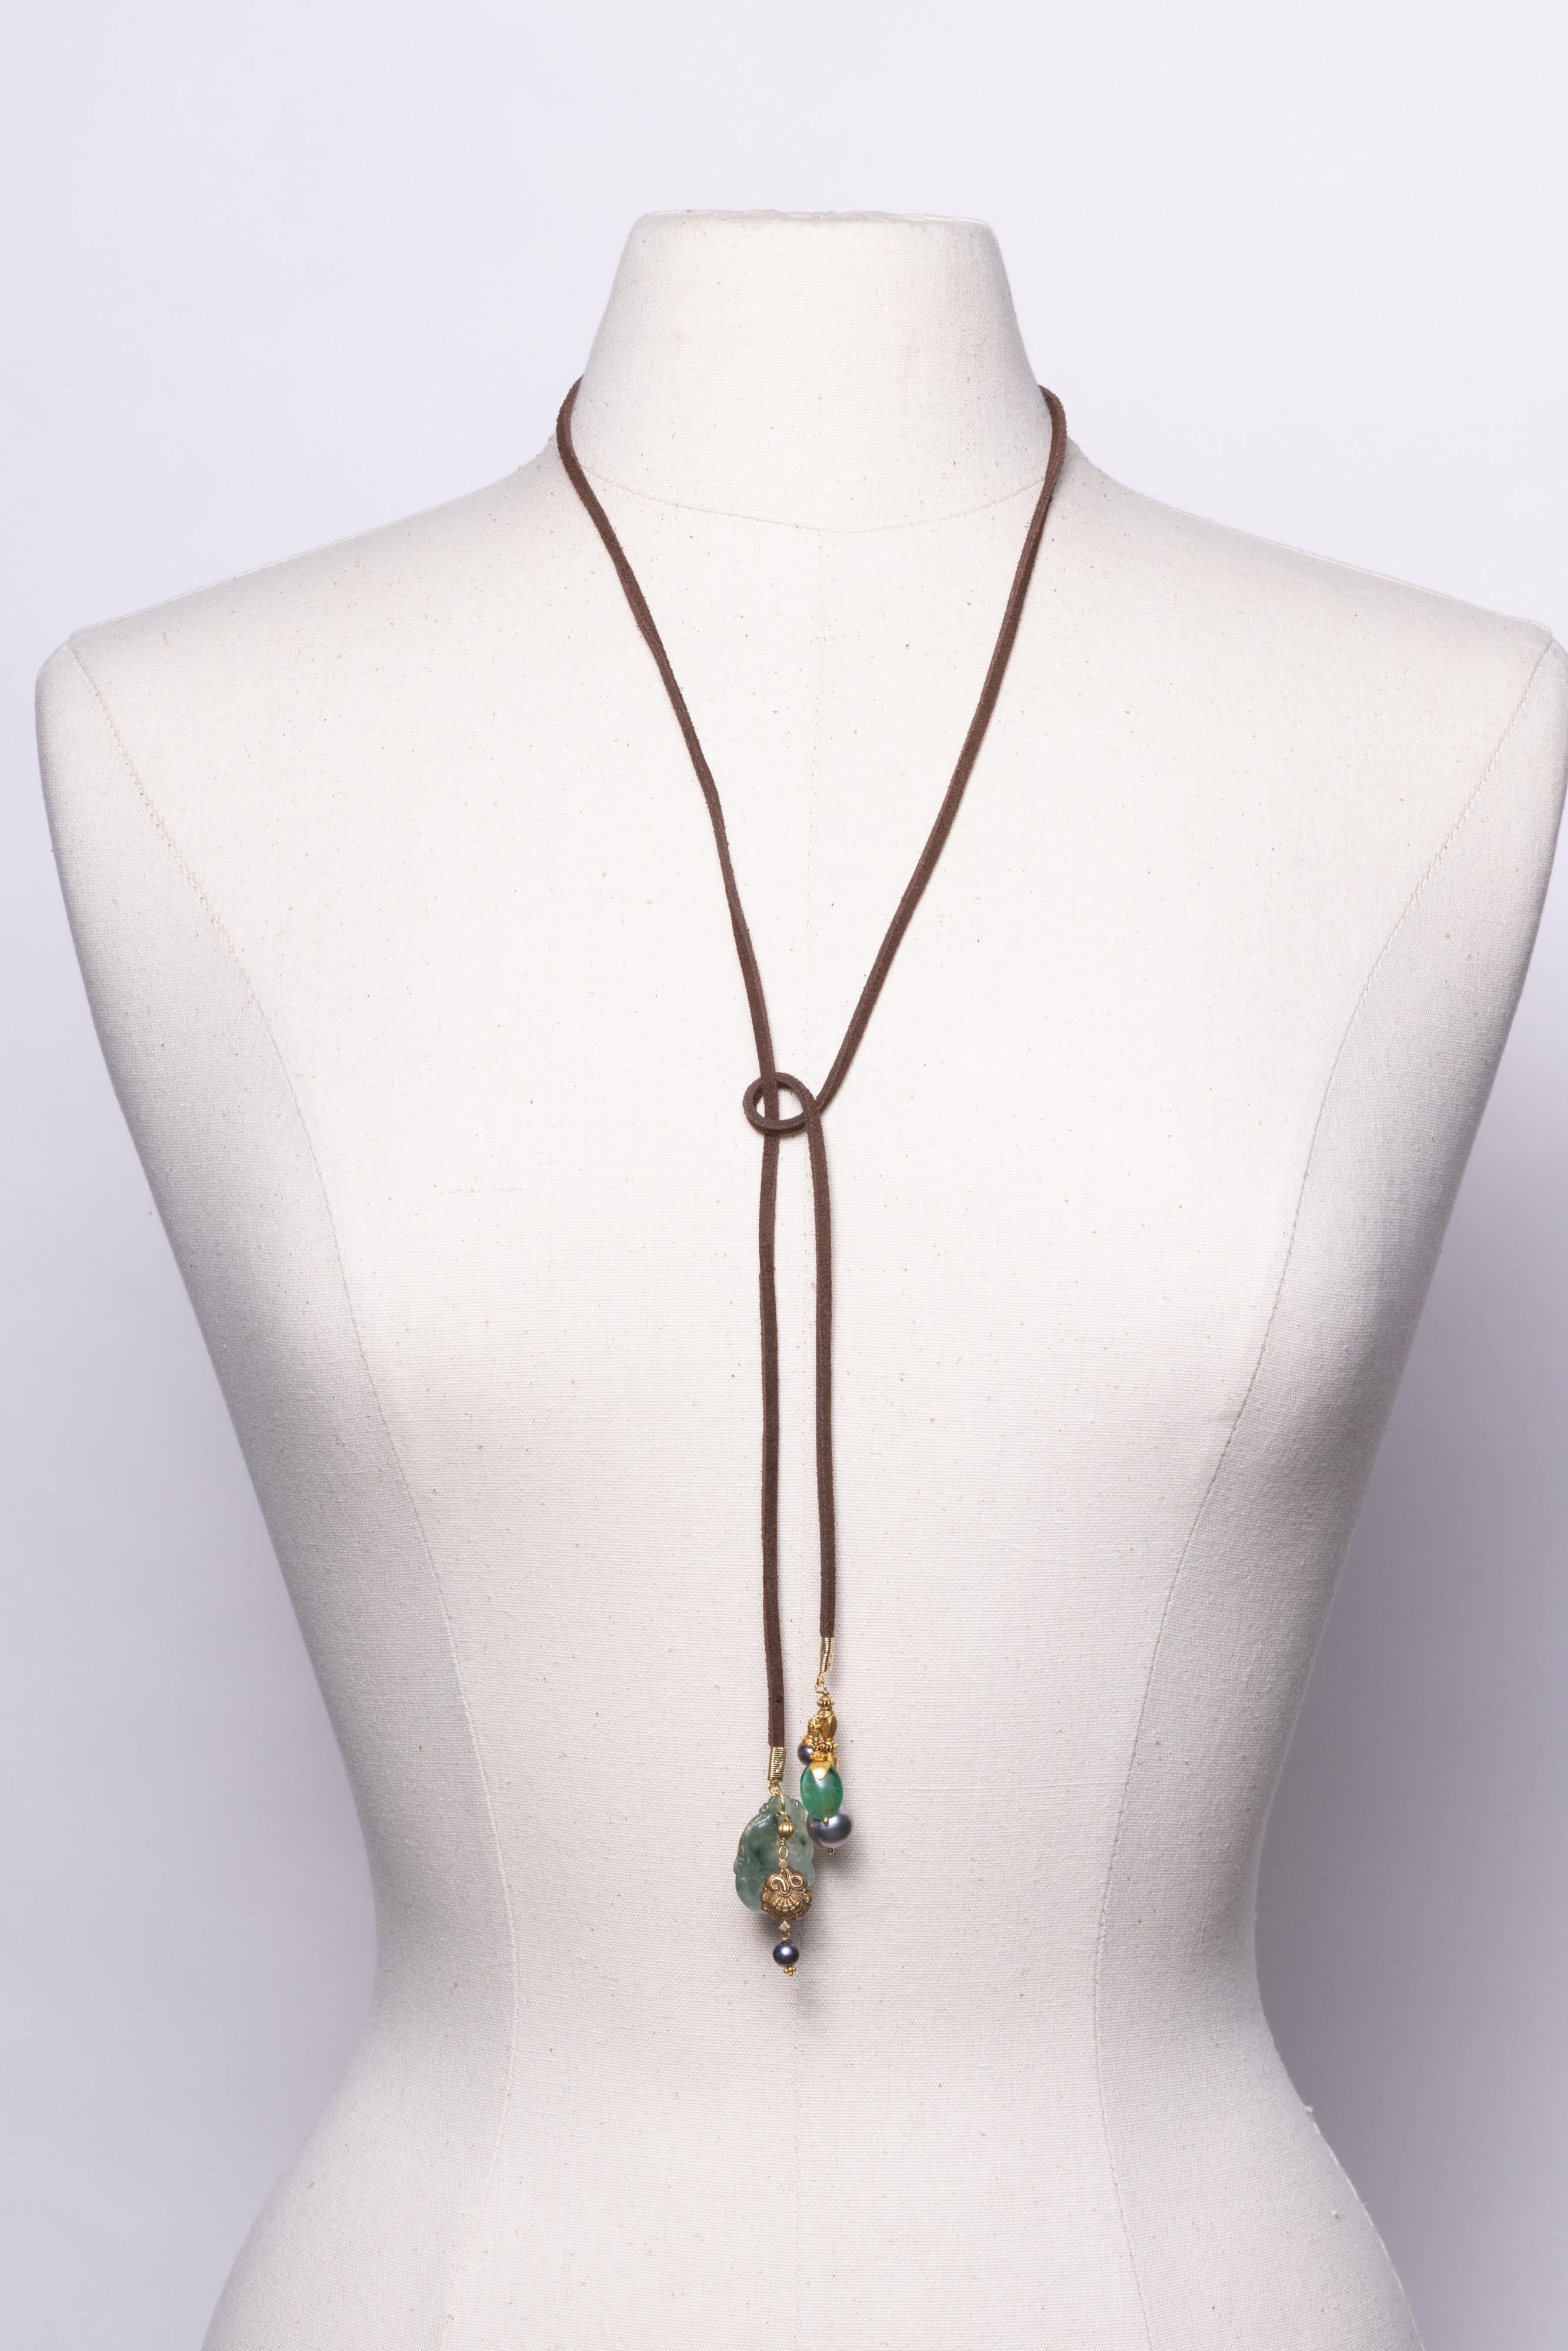 Women's or Men's Leather Lariat with Black Tahitian Pearls, Jade, Emeralds and 18K Gold For Sale